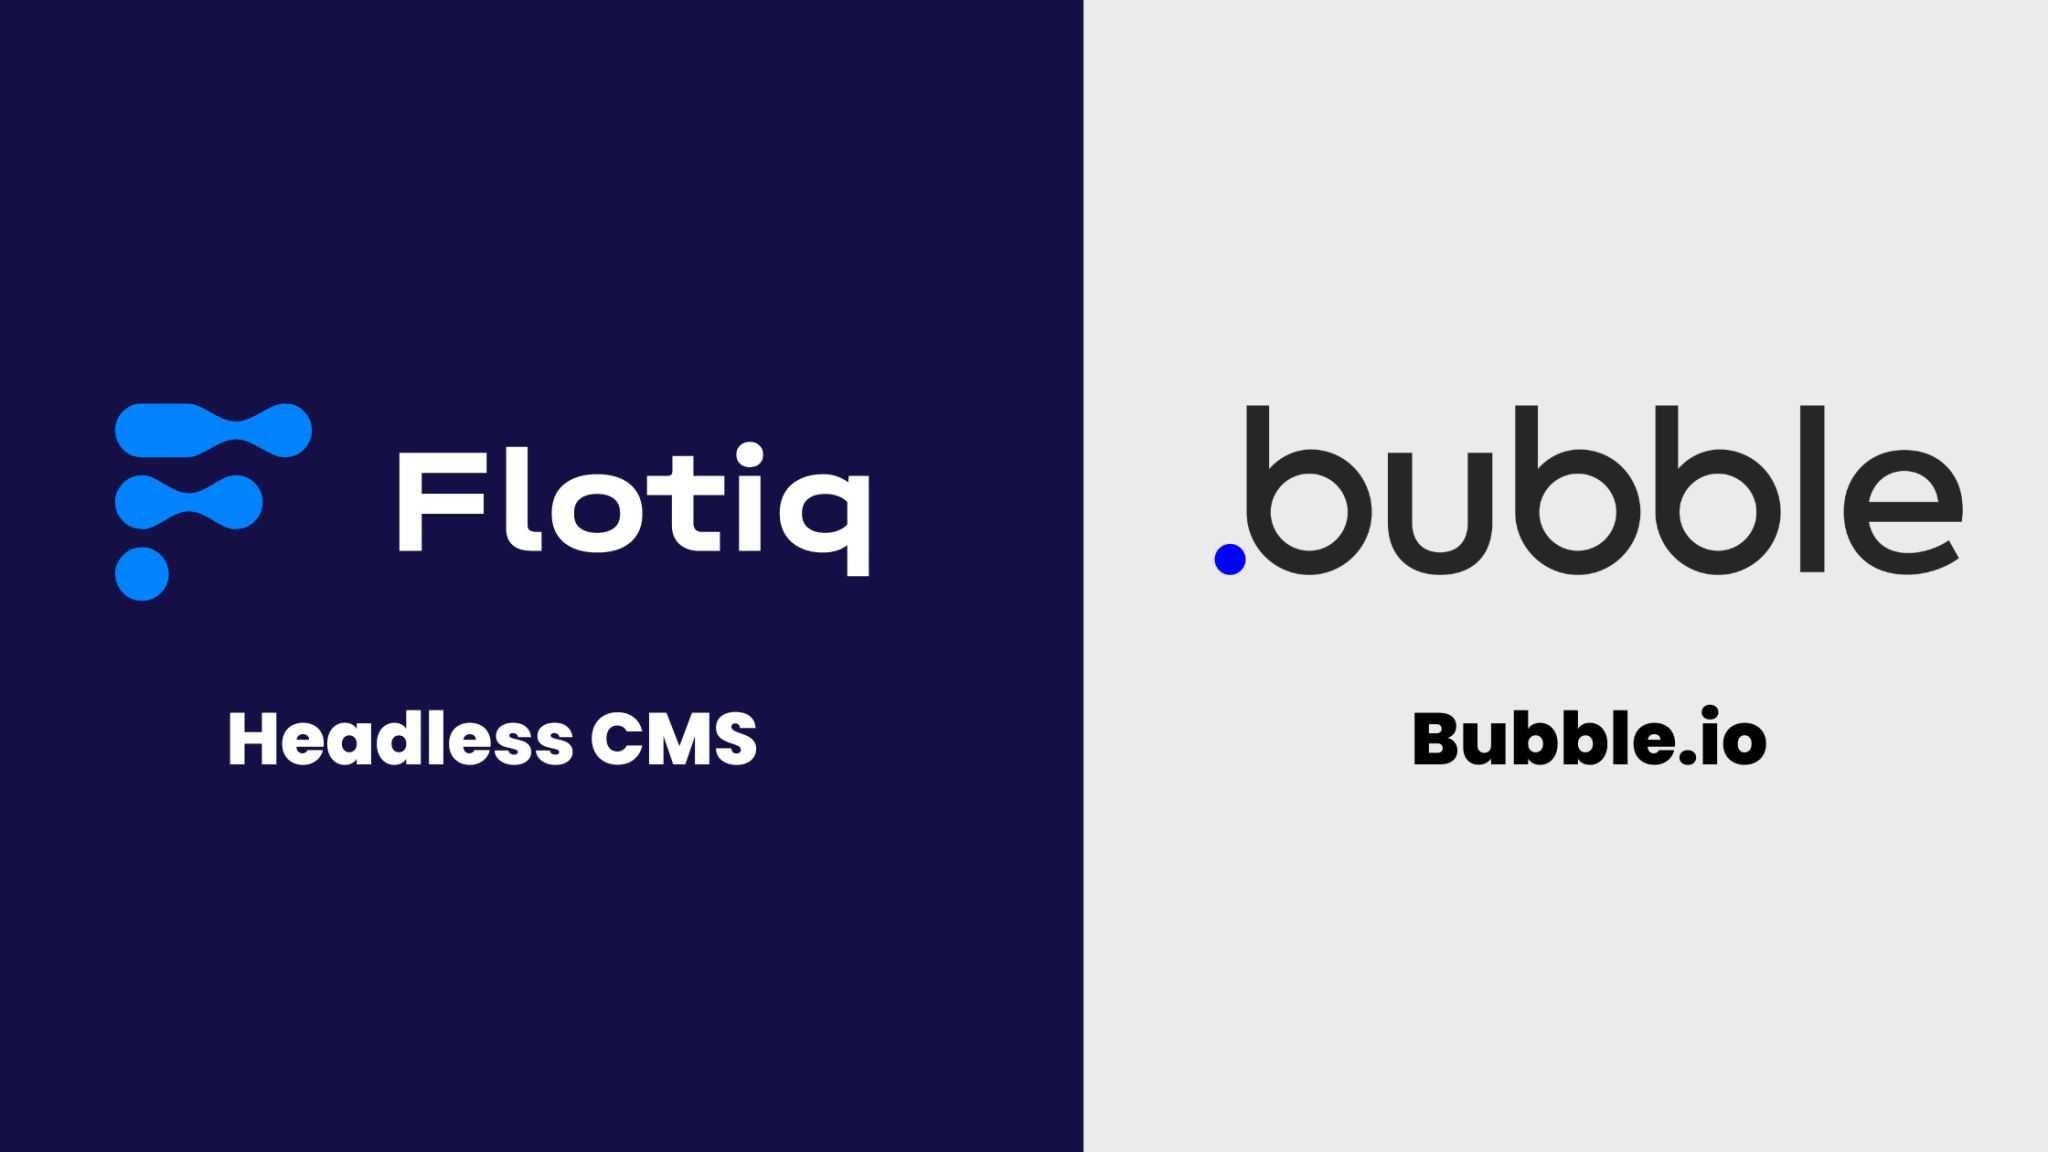 Integrate Flotiq with Bubble.io: step-by-step guide